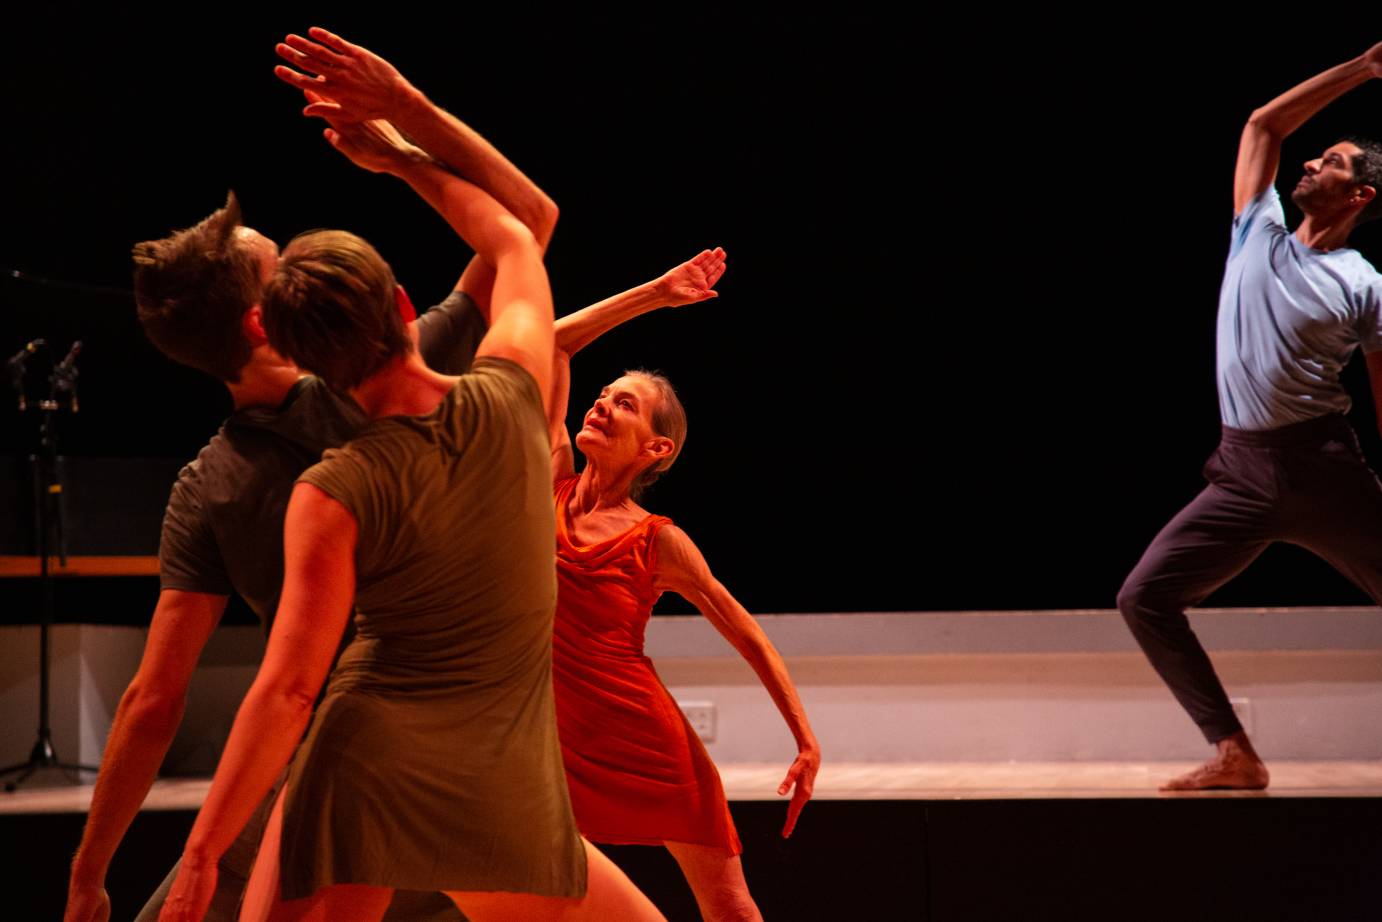 four dancers lunge in profile. one stands on a stage, 3 hit the pose in a cluster facing one another. The trio is on a level below the soloist.